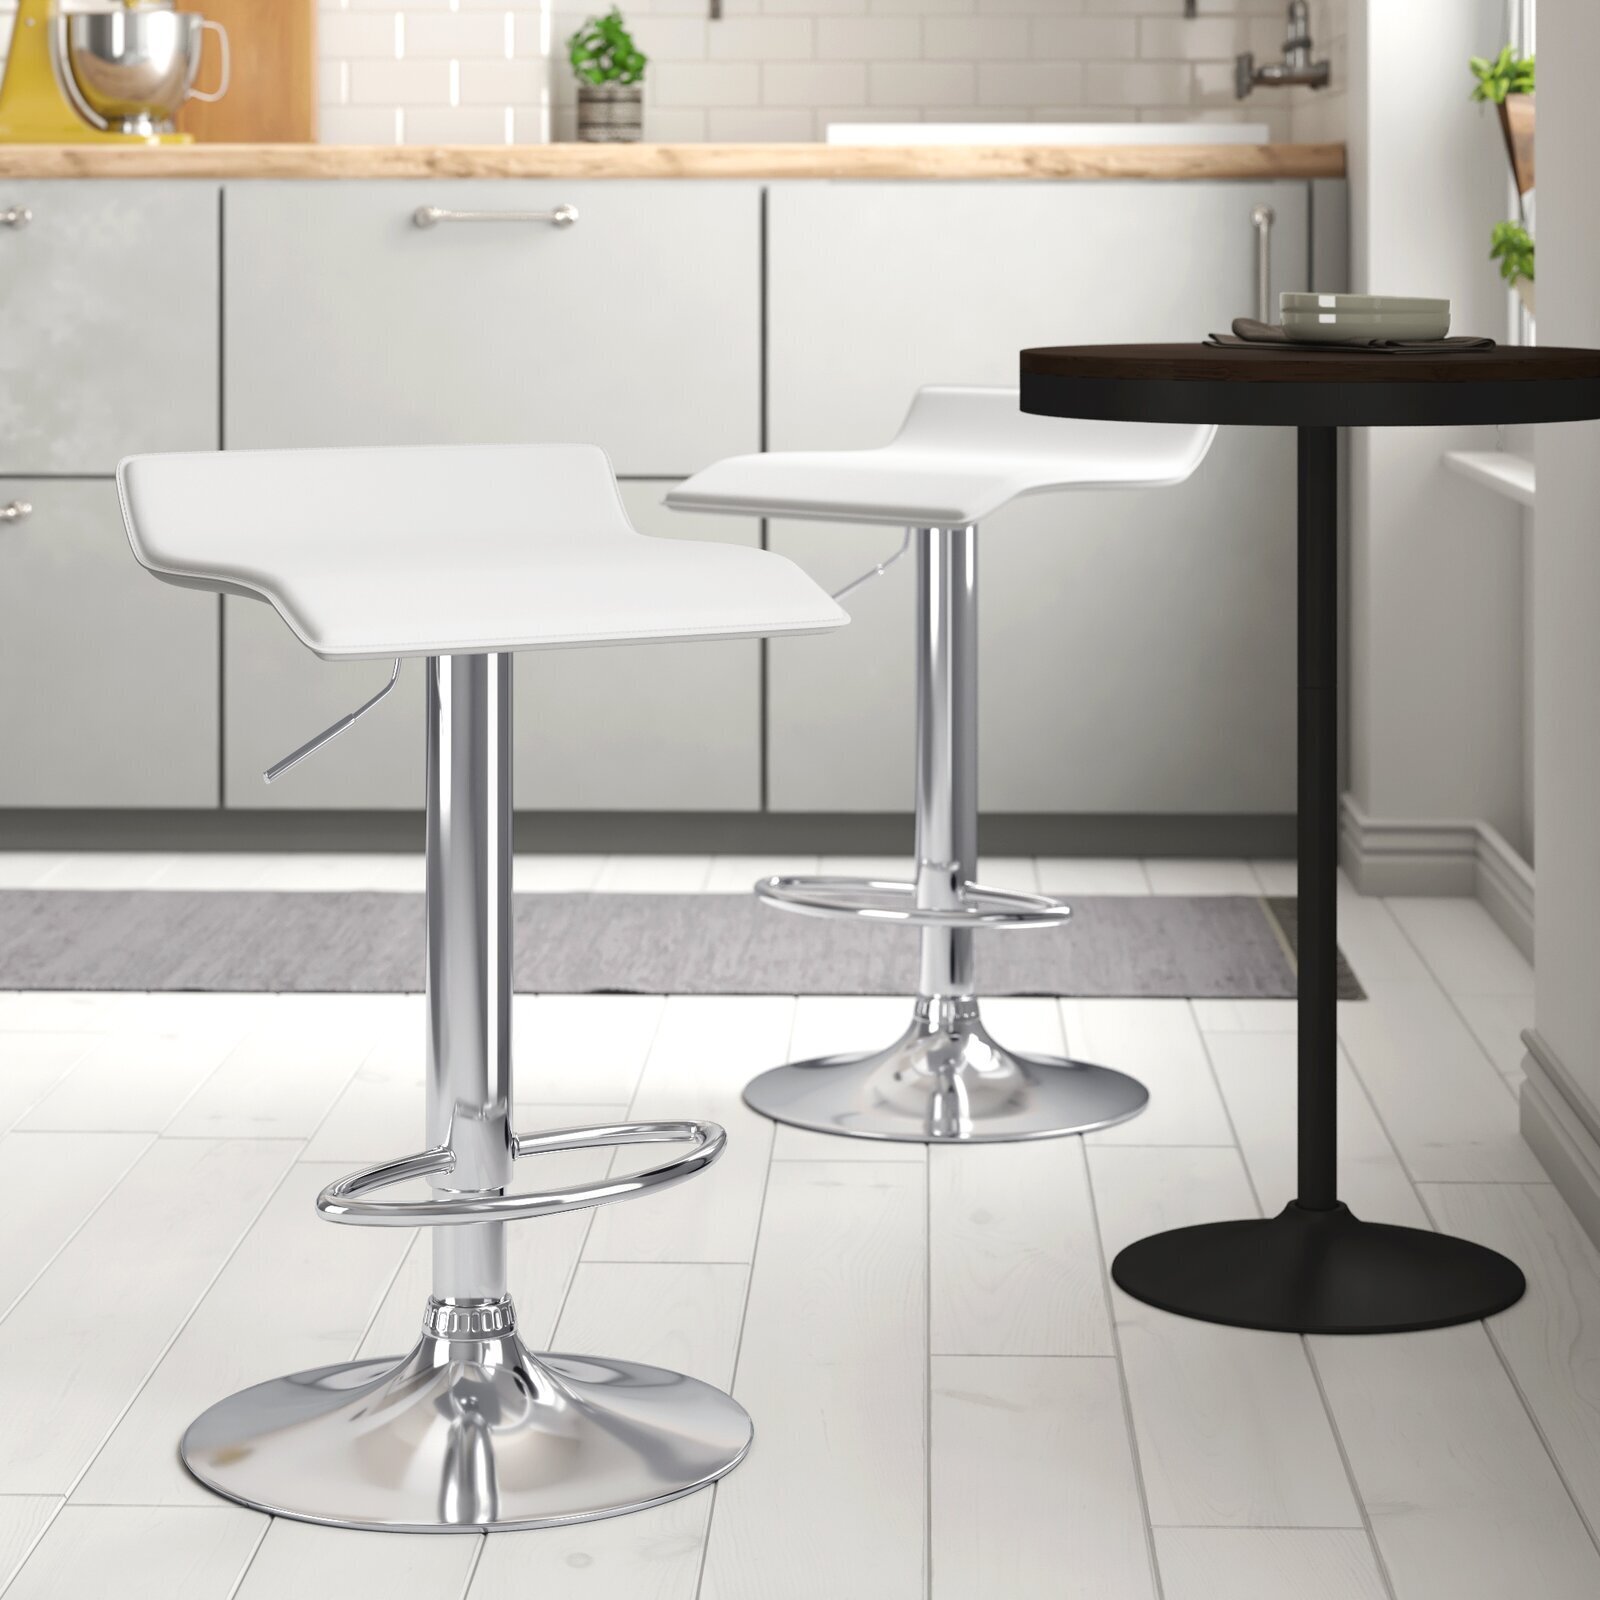 Low Contemporary Kitchen Bar Stools